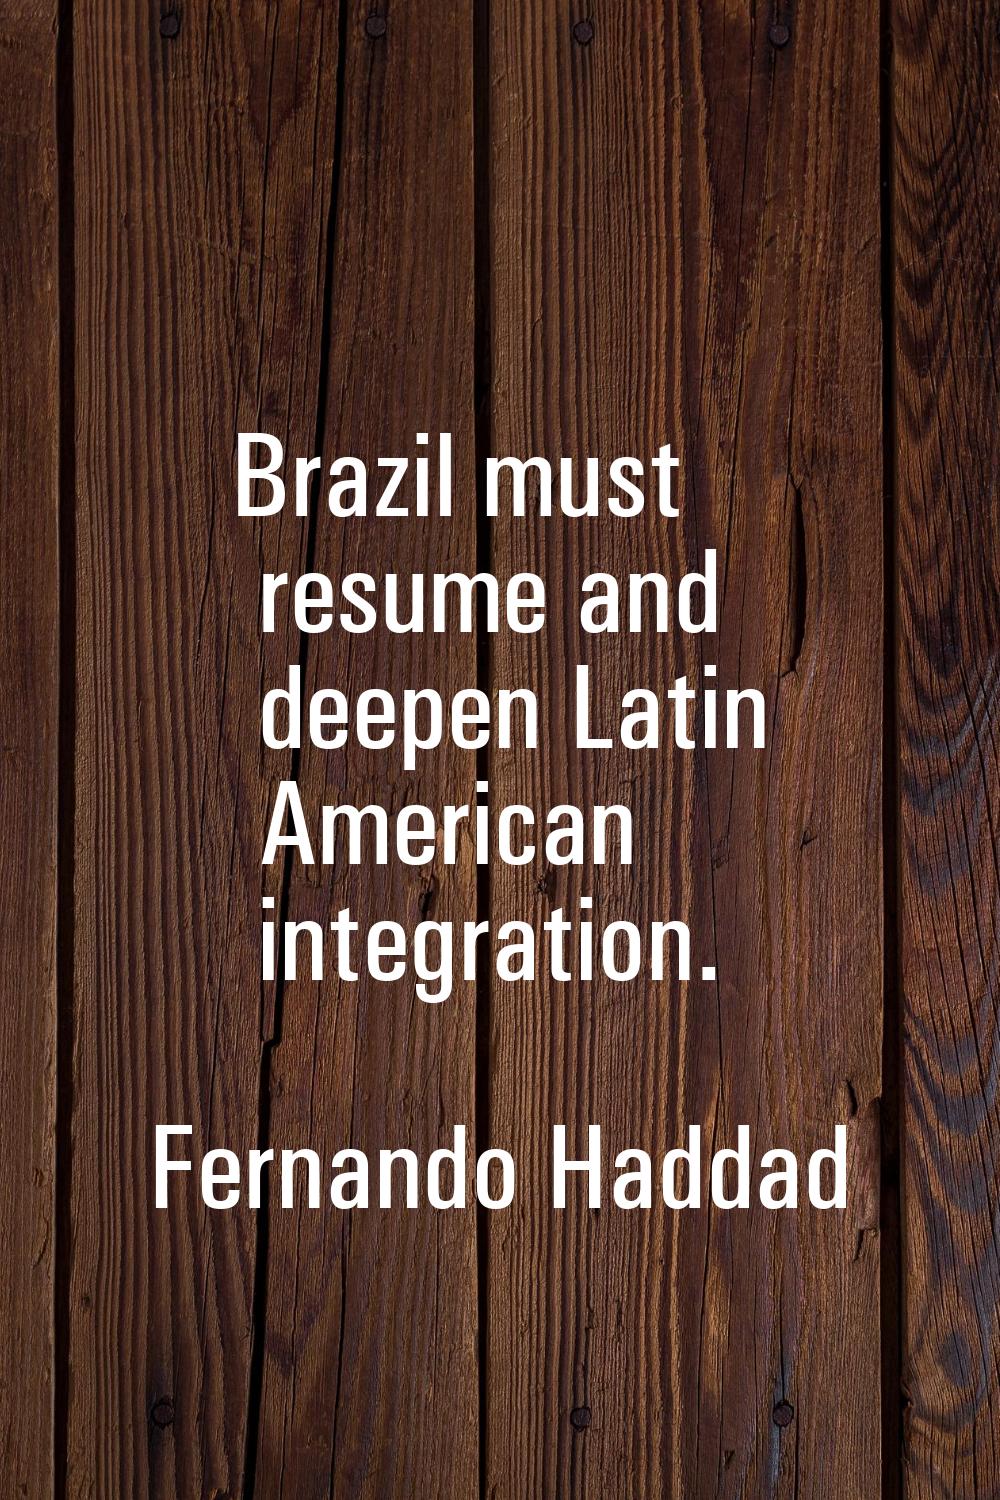 Brazil must resume and deepen Latin American integration.